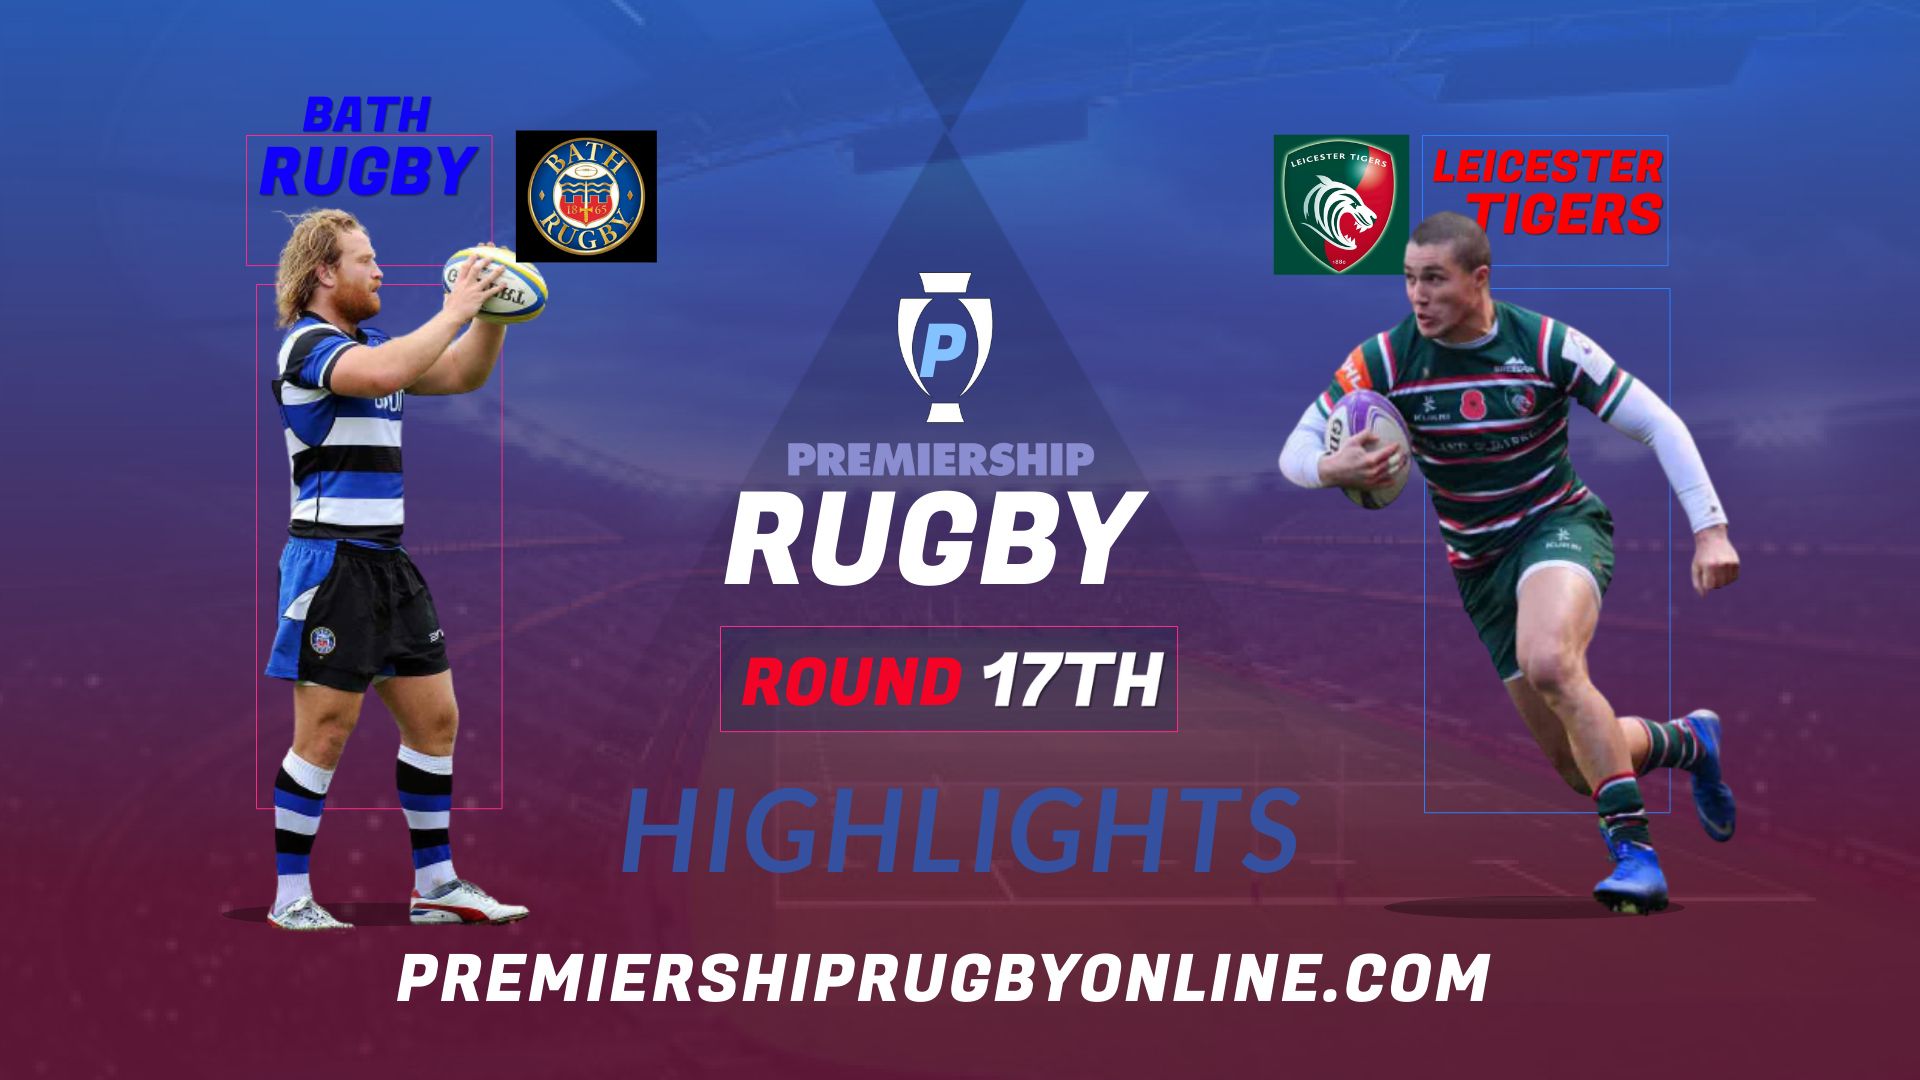 Bath Rugby Vs Leicester Tigers Highlights 2022 RD 17